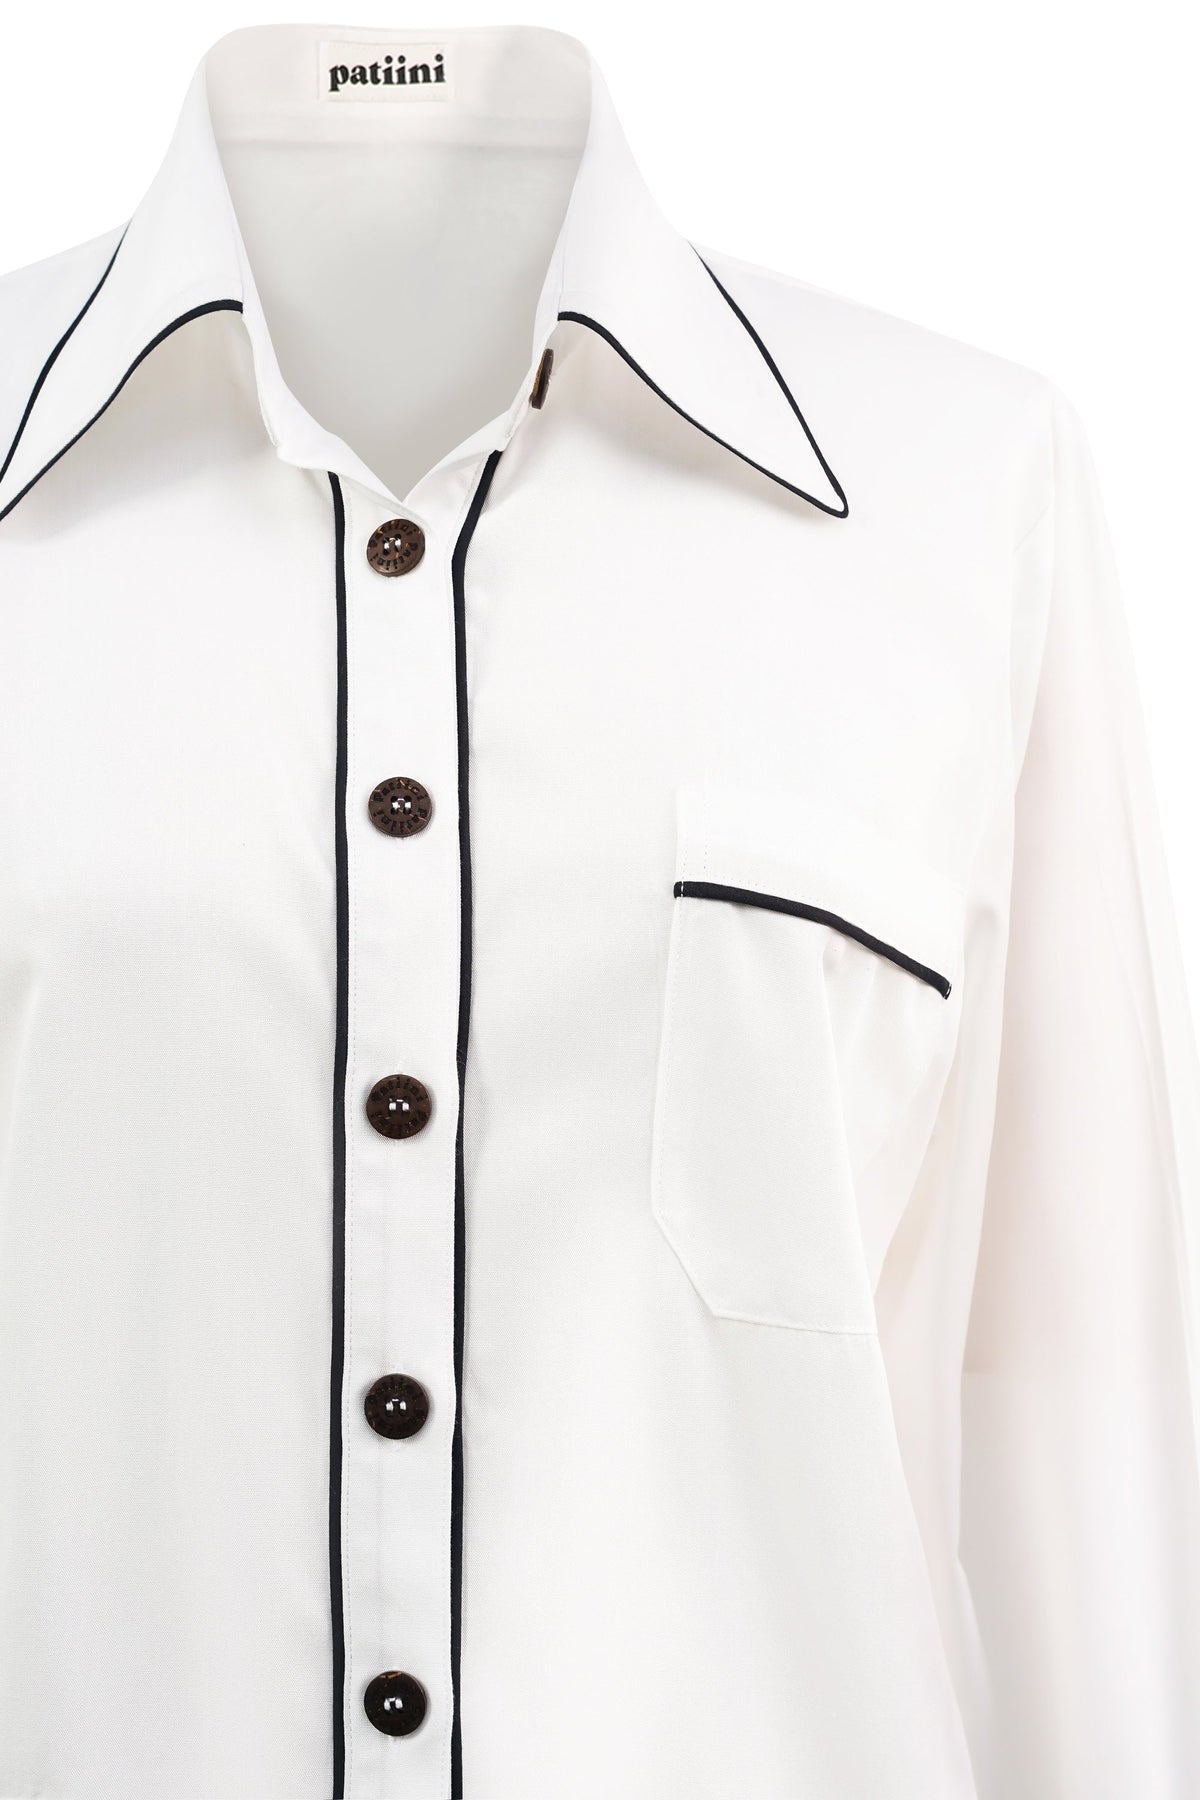 Close-up of white pajama shirt with coconut shell buttons.